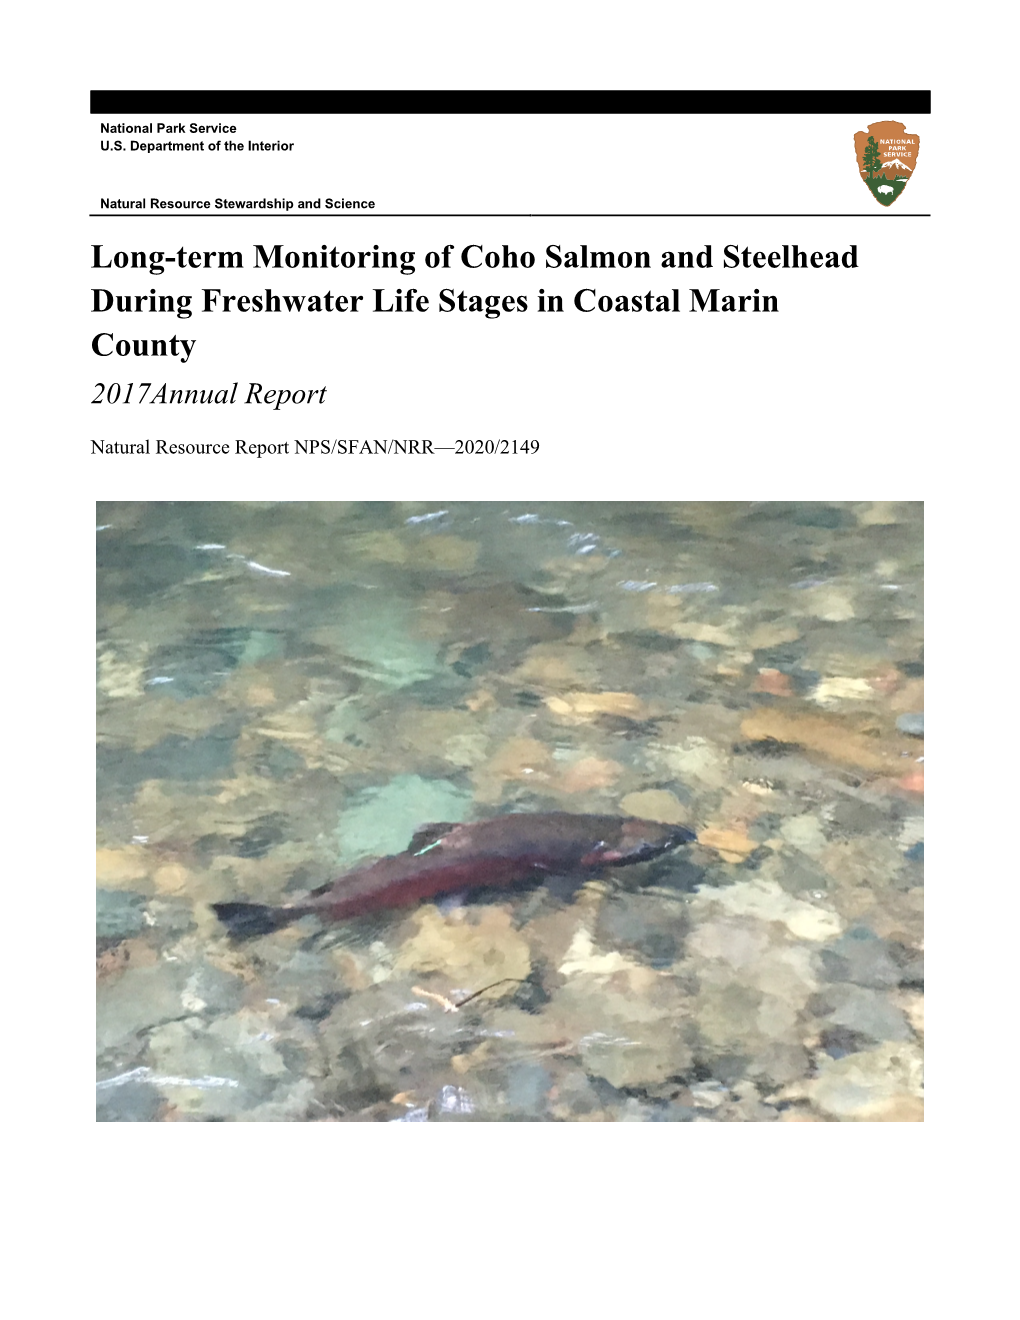 Long-Term Monitoring of Coho Salmon and Steelhead During Freshwater Life Stages in Coastal Marin County 2017Annual Report